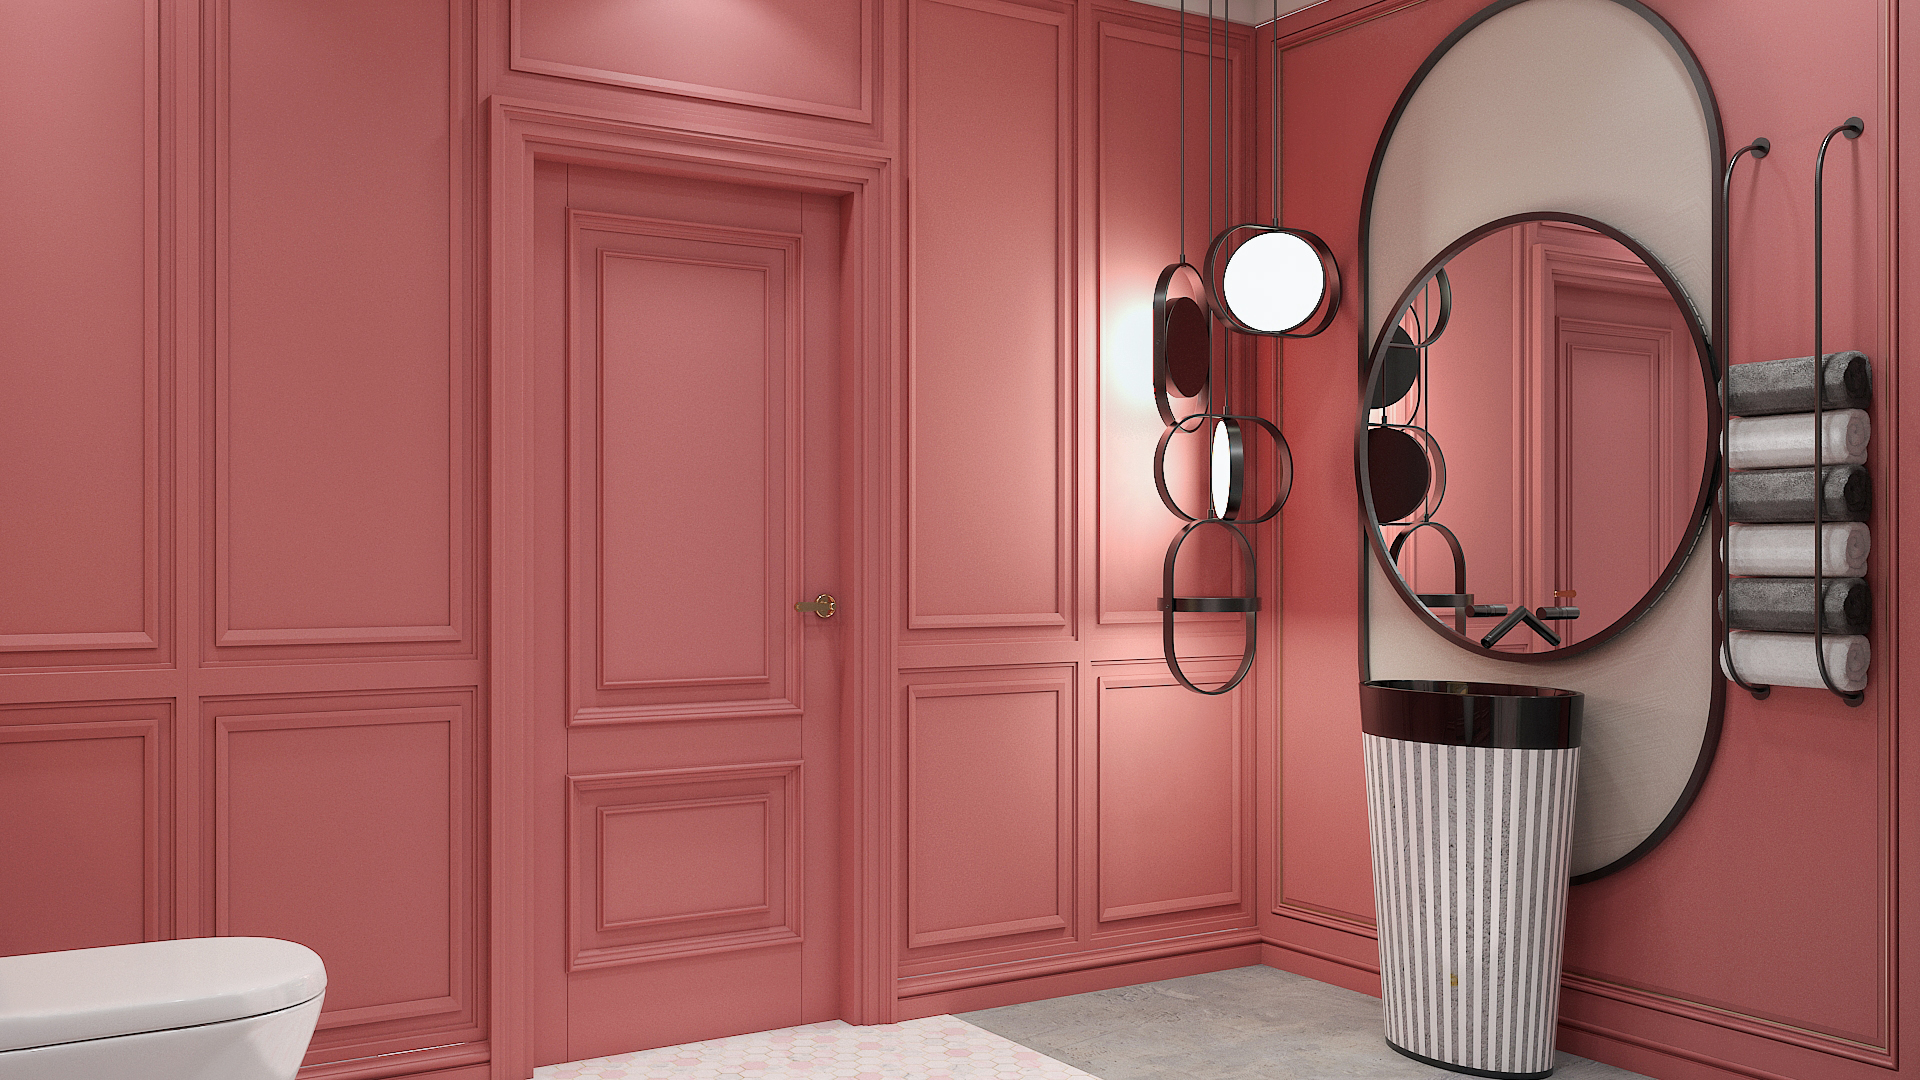 A Bit Different Vision of Pink Bathroom